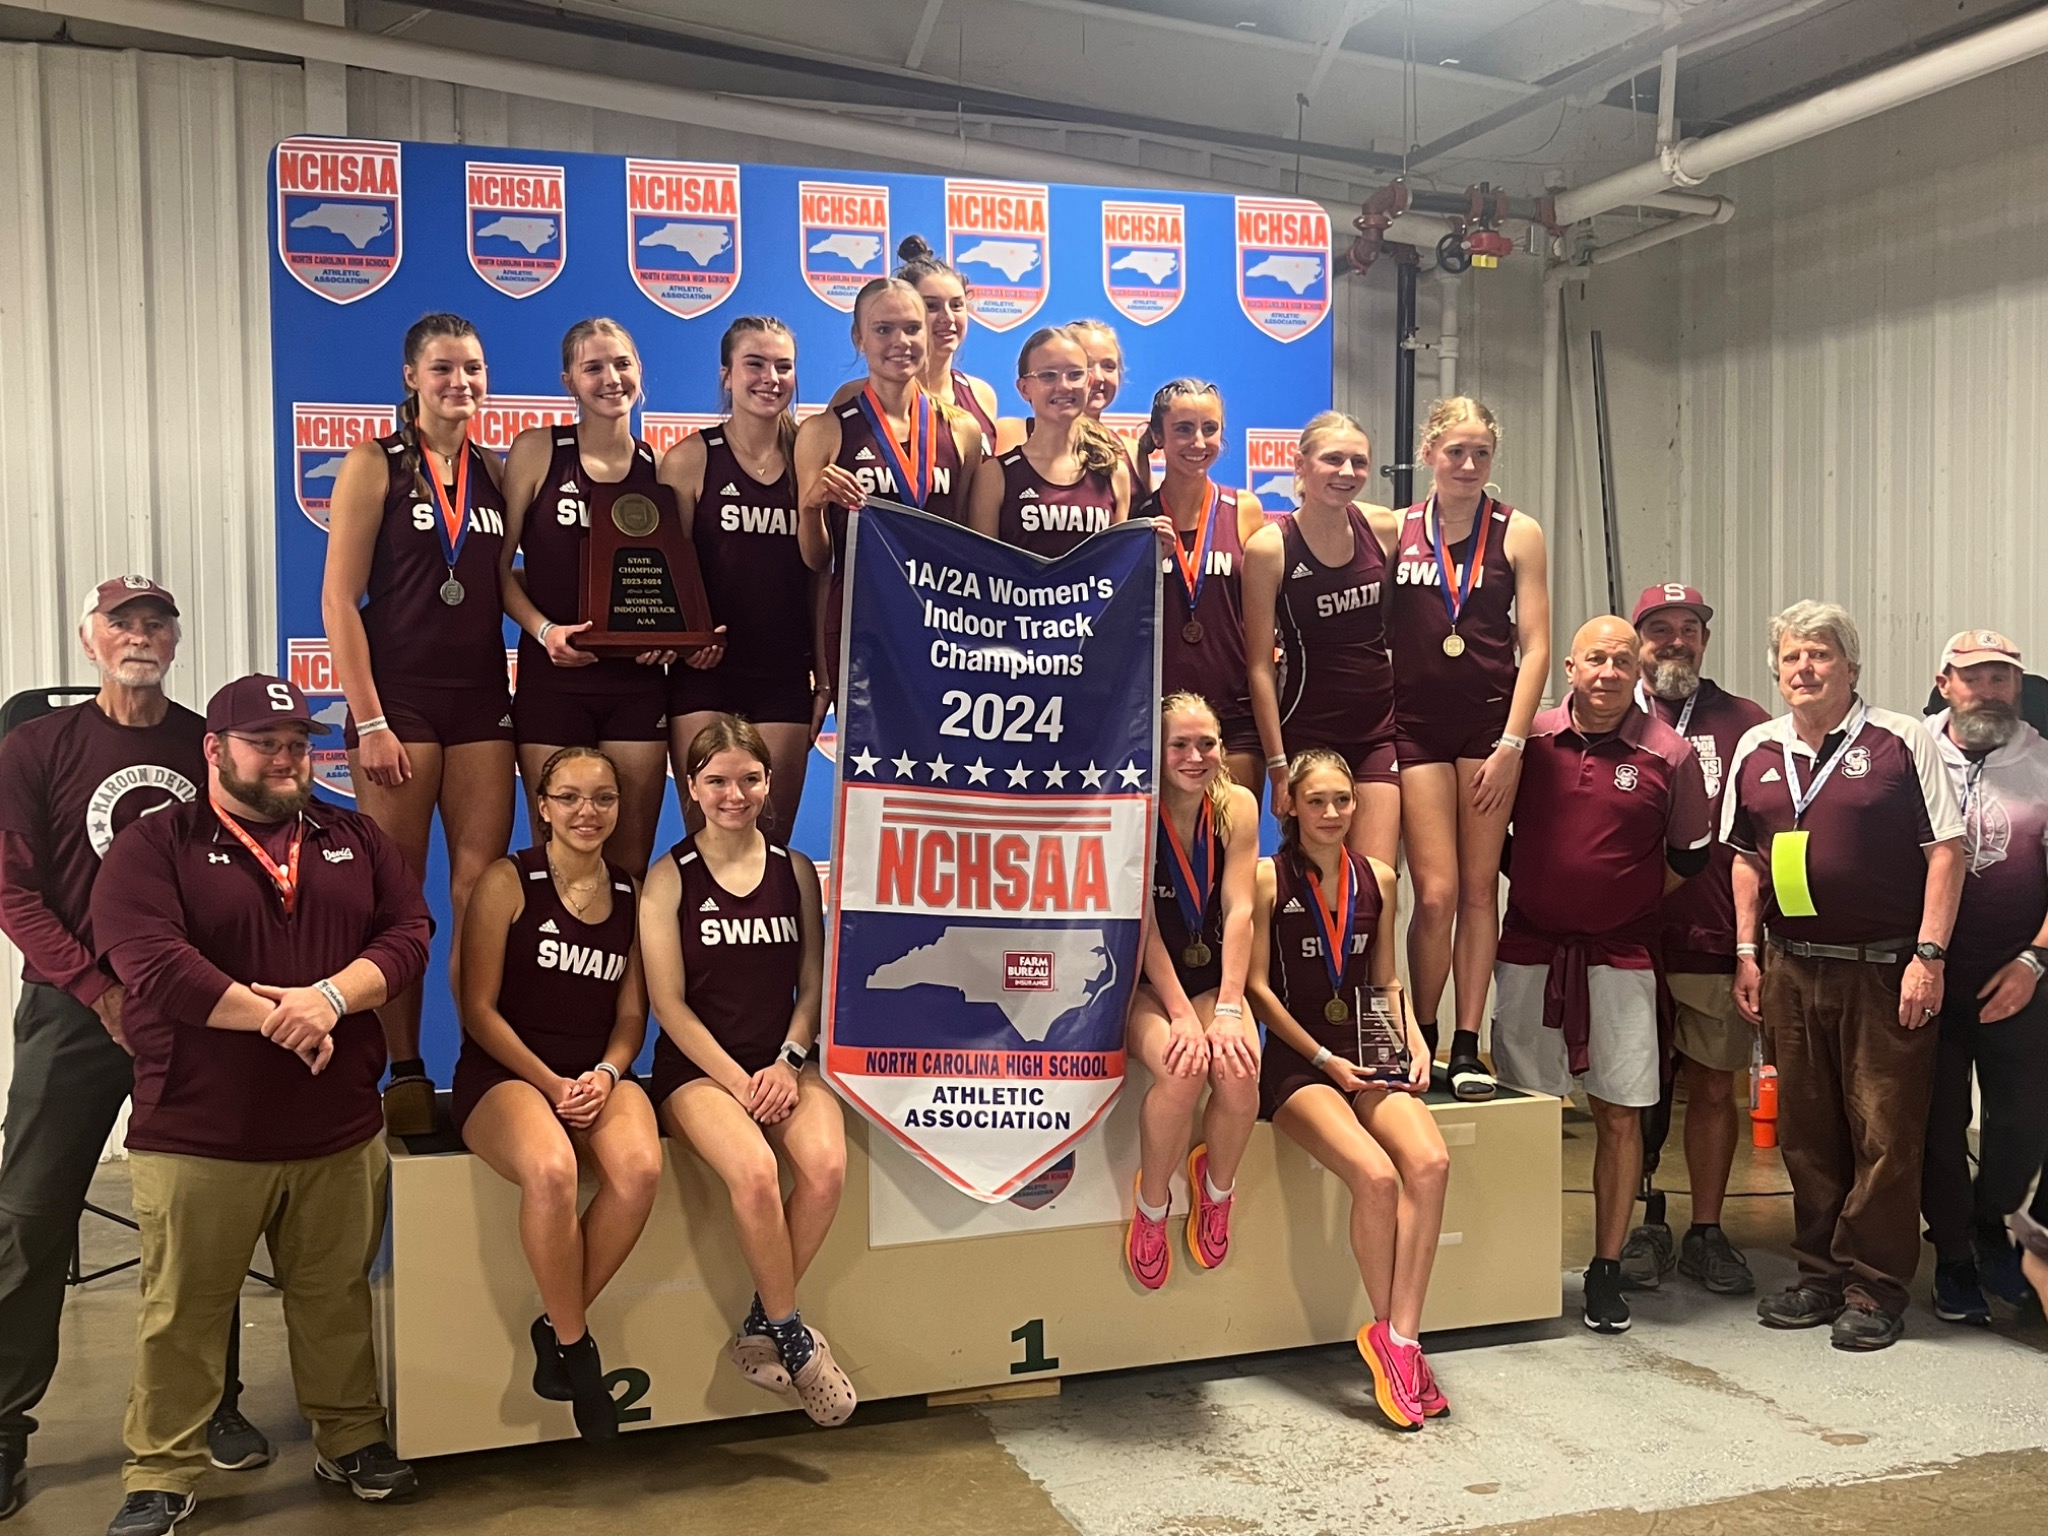 The Swain County High Lady Devils indoor track team earned the championship 1A/2A NCHSAA title this past weekend.